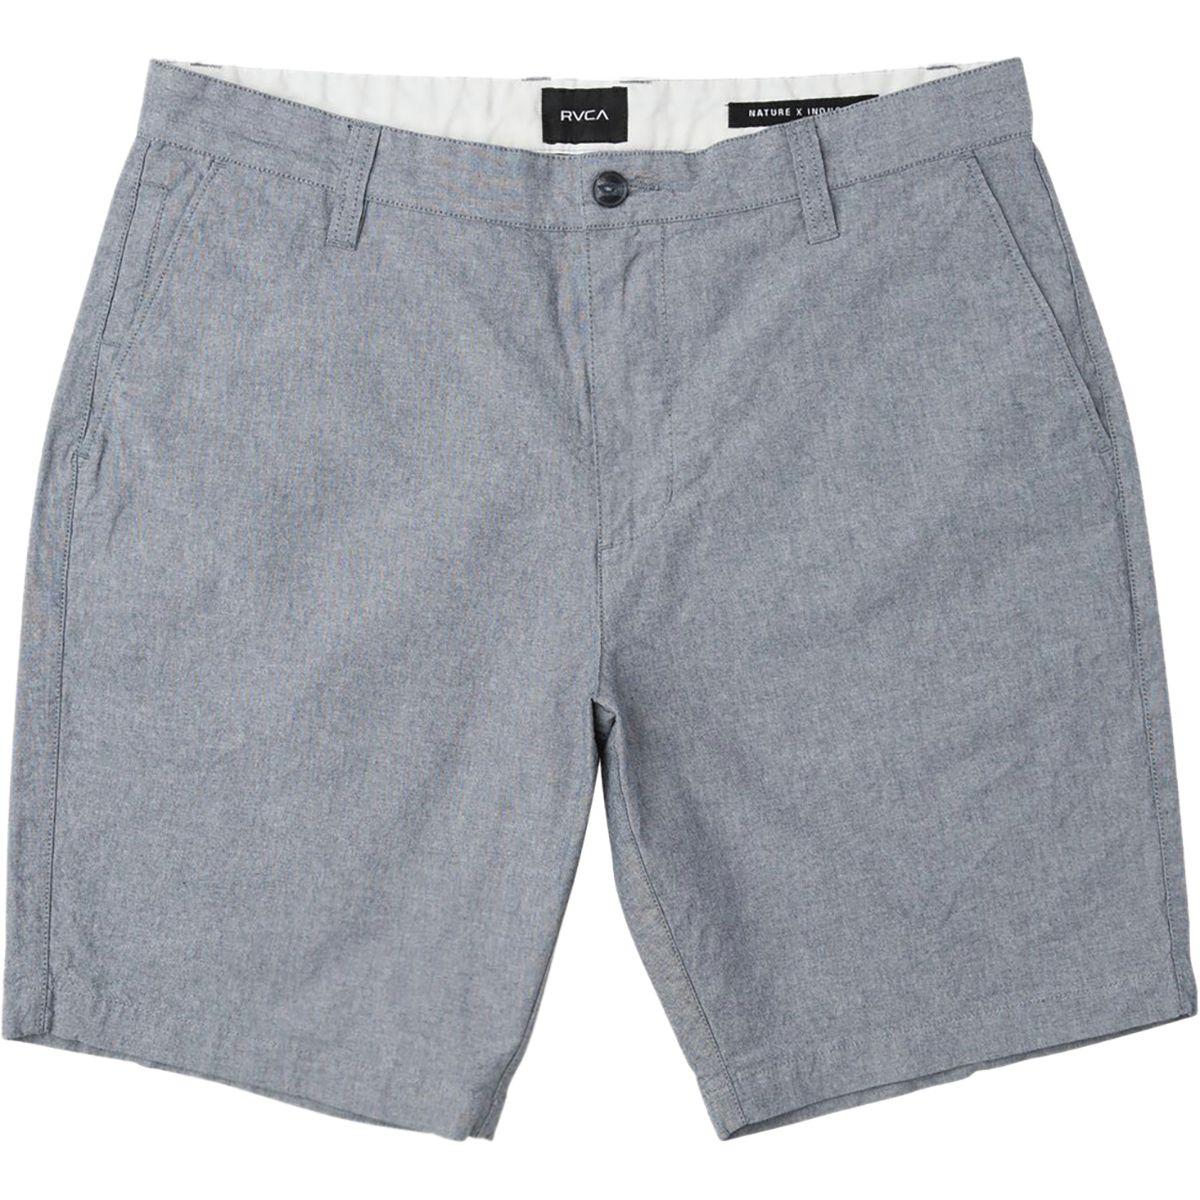 RVCA Cotton That'll Walk Oxford Short in Blue for Men - Lyst